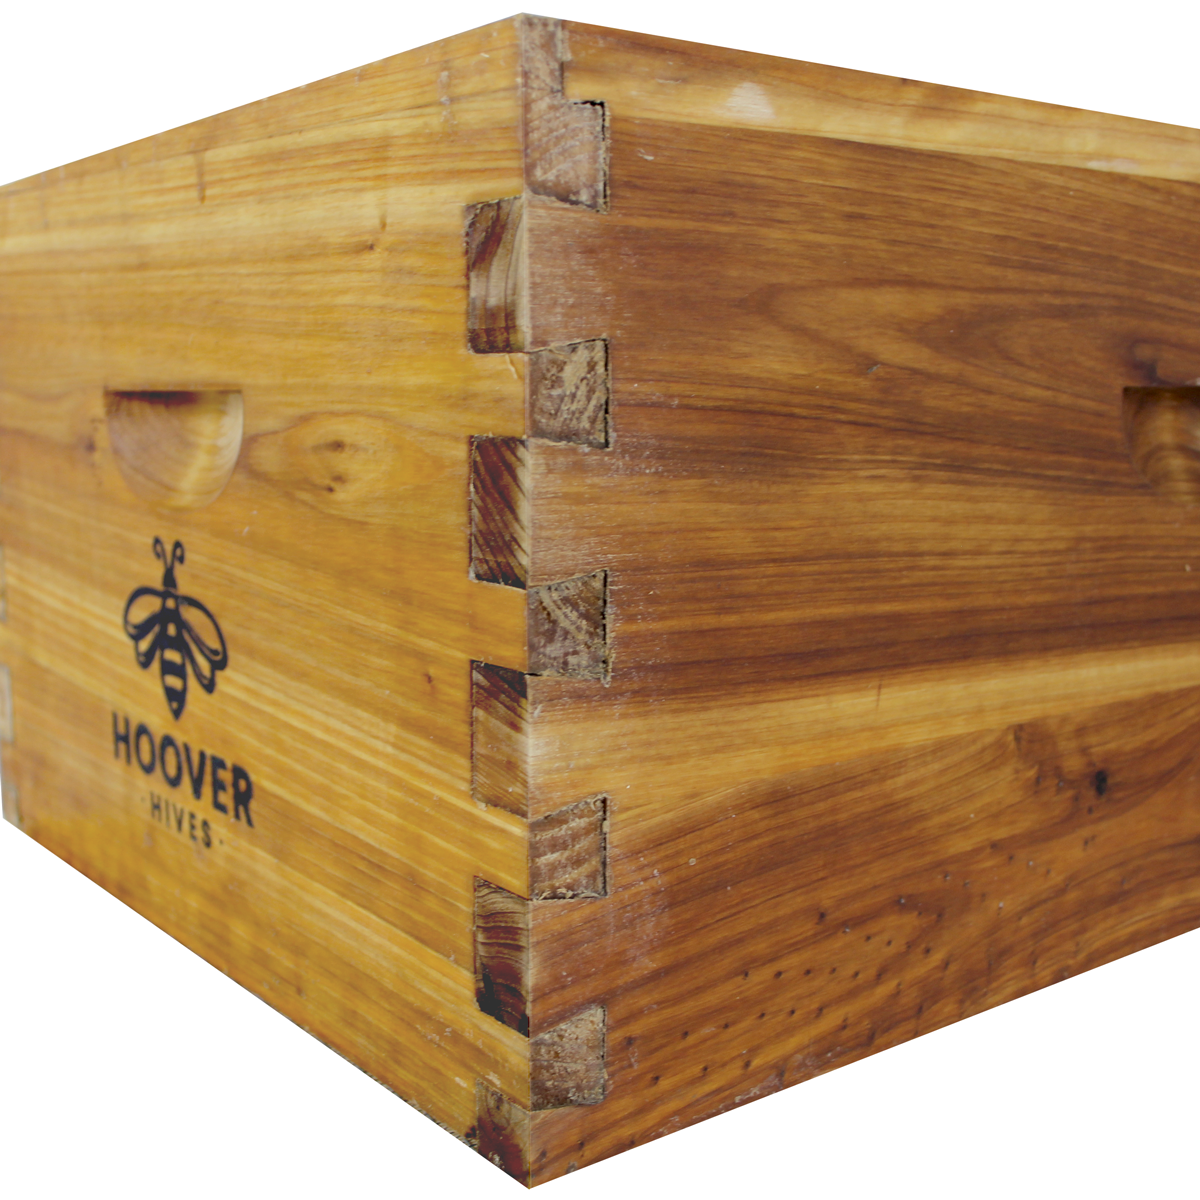 Hoover Hives Wax Coated 8 Frame Deep Bee Box Has Dovetails in Every Joint